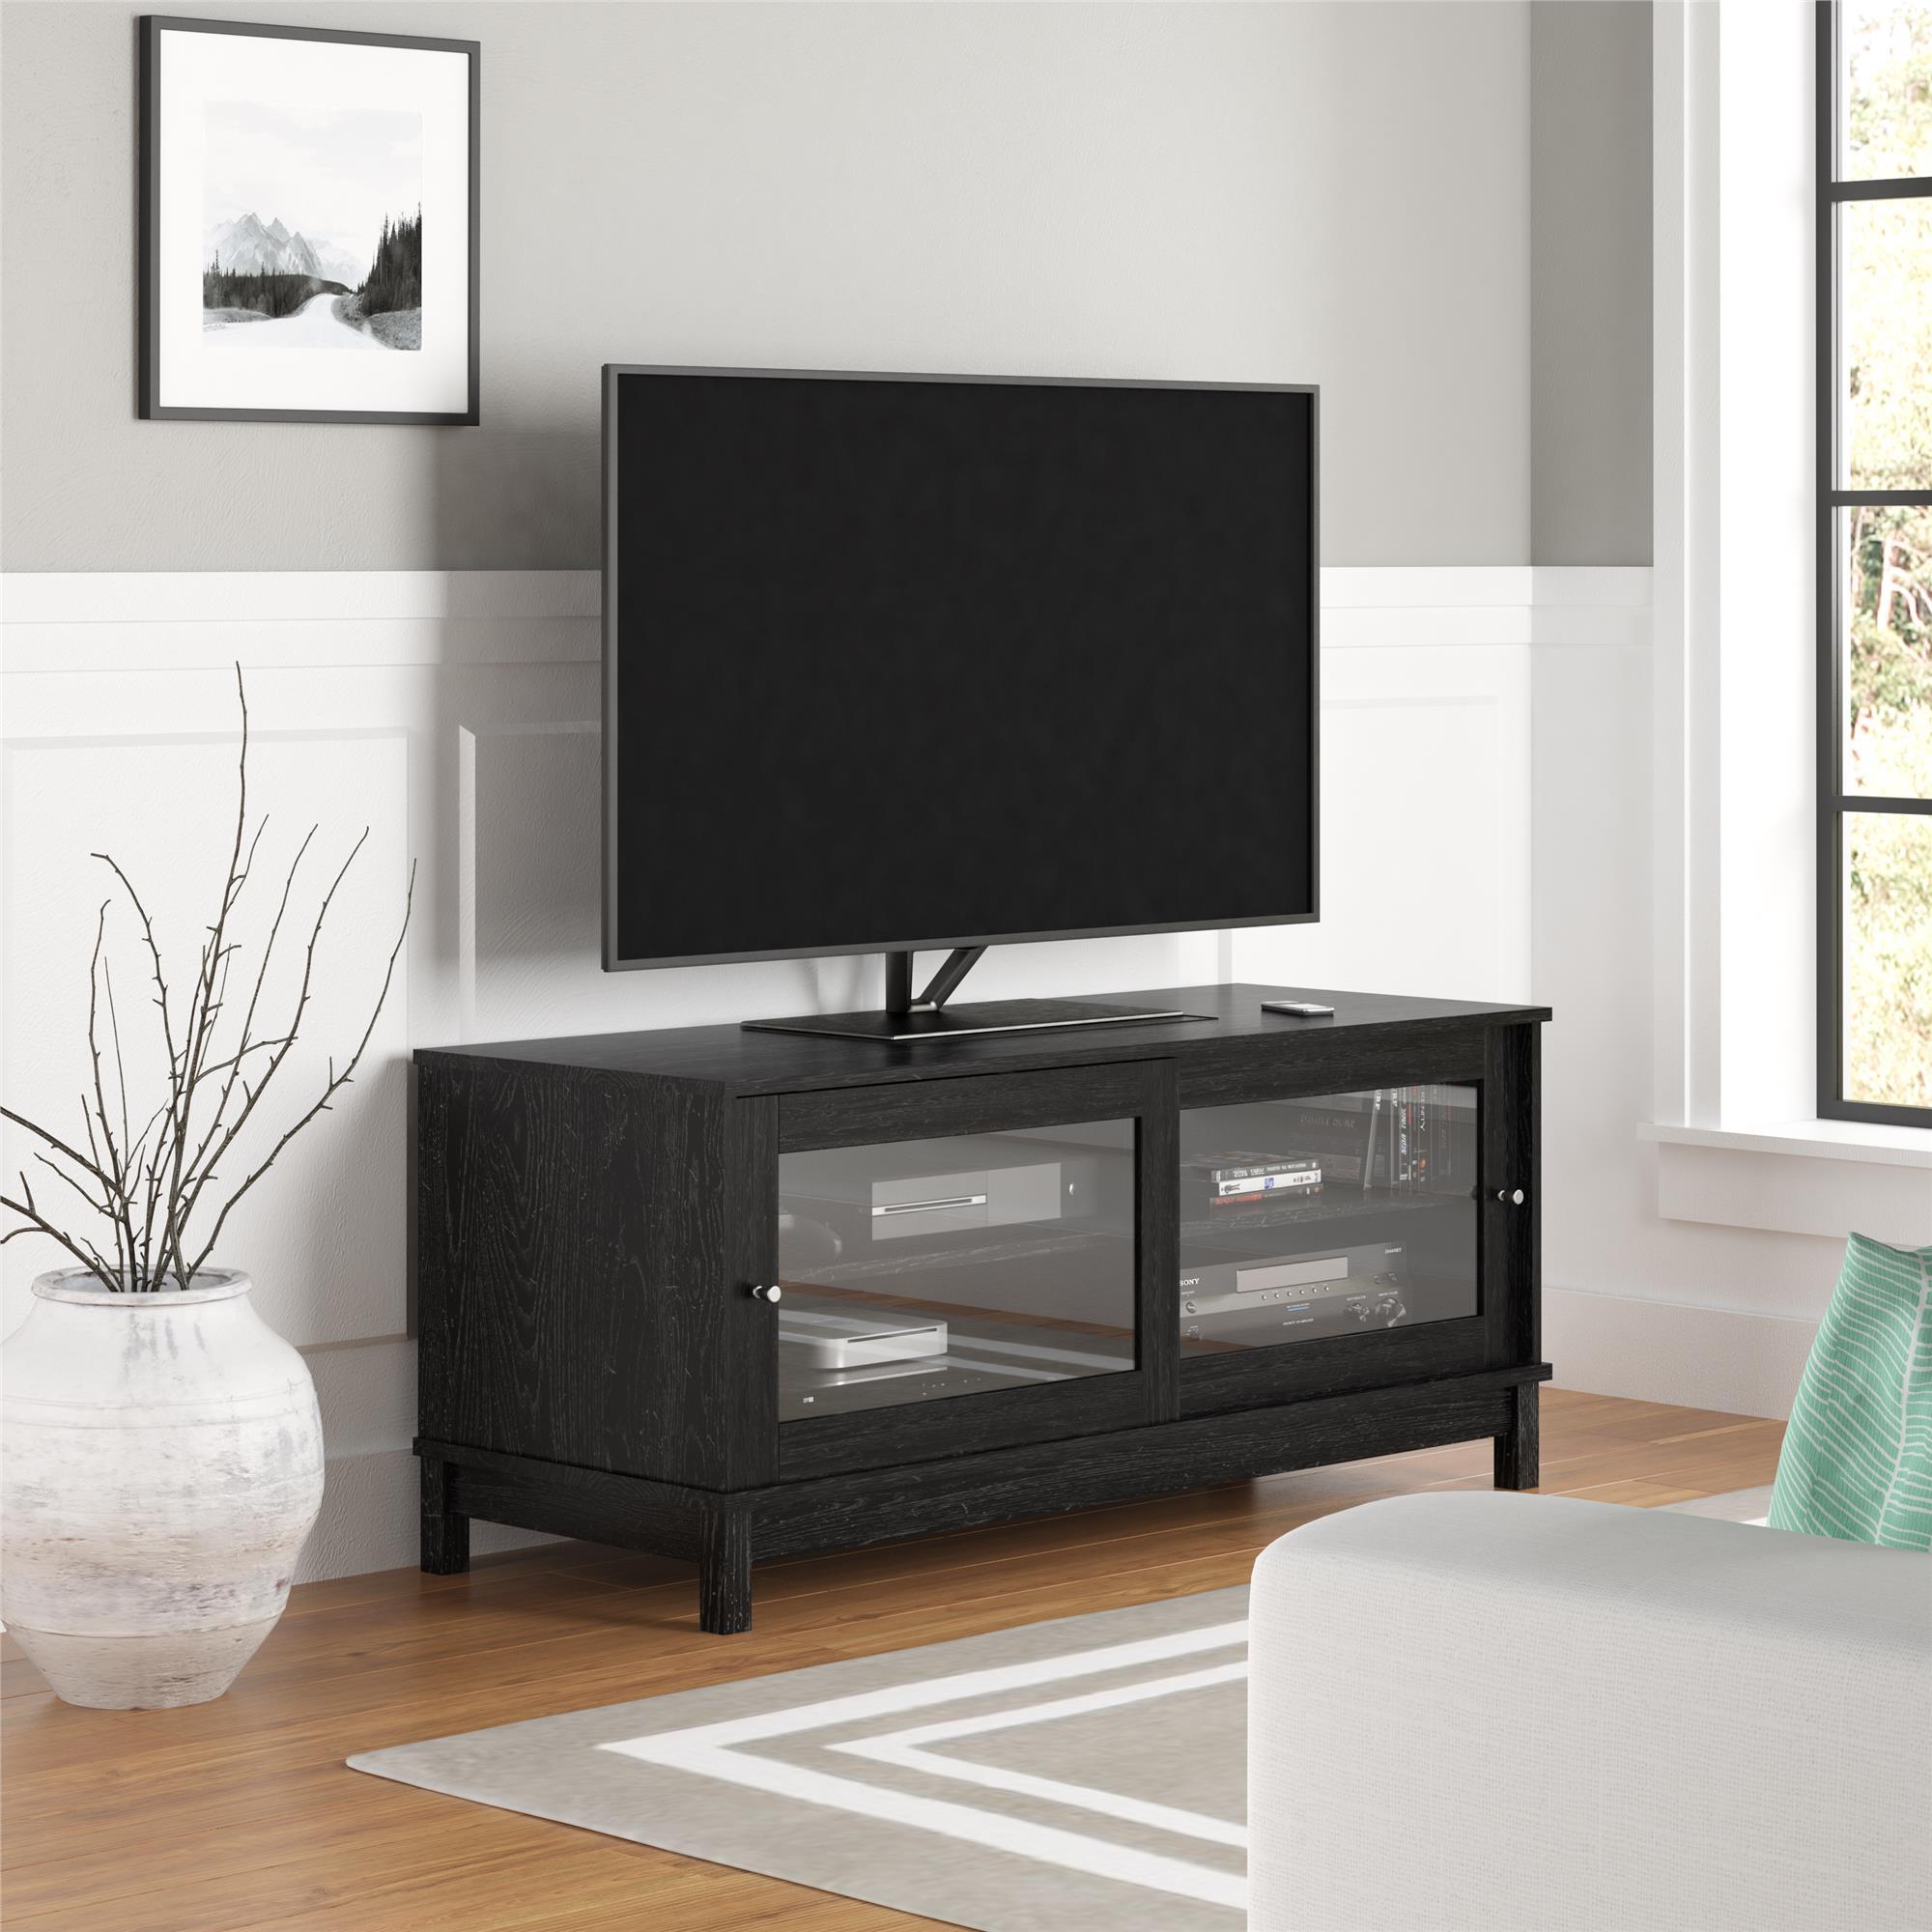 Mainstays TV Stand for TVs up to 55", Multiple Finishes - Black - image 1 of 9